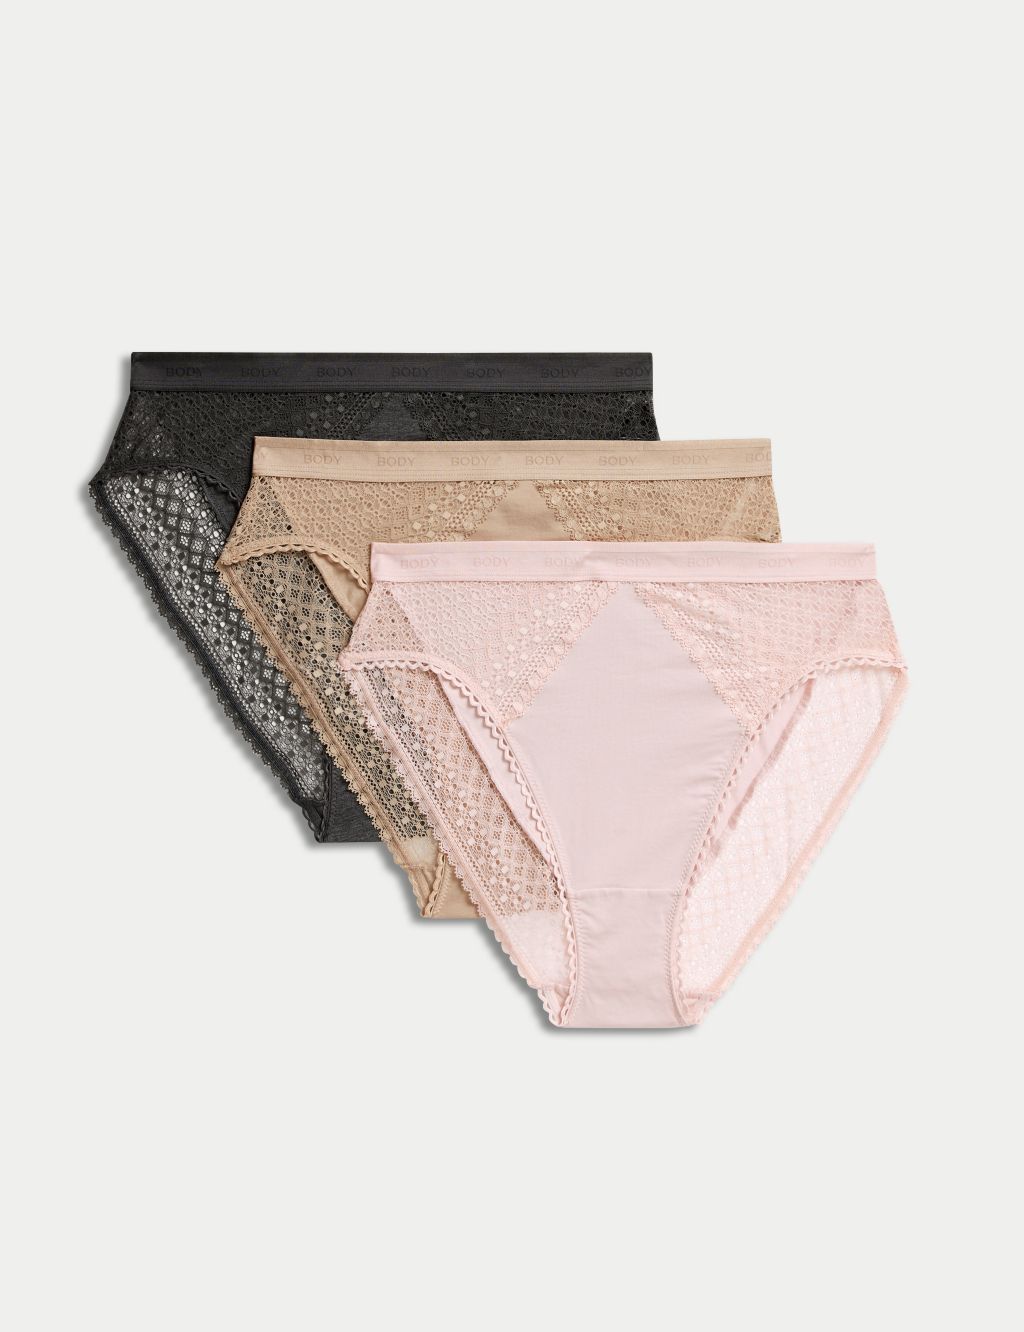 Comfortable Cotton Lace Border Pink Lace Panties For Girls Ages 8